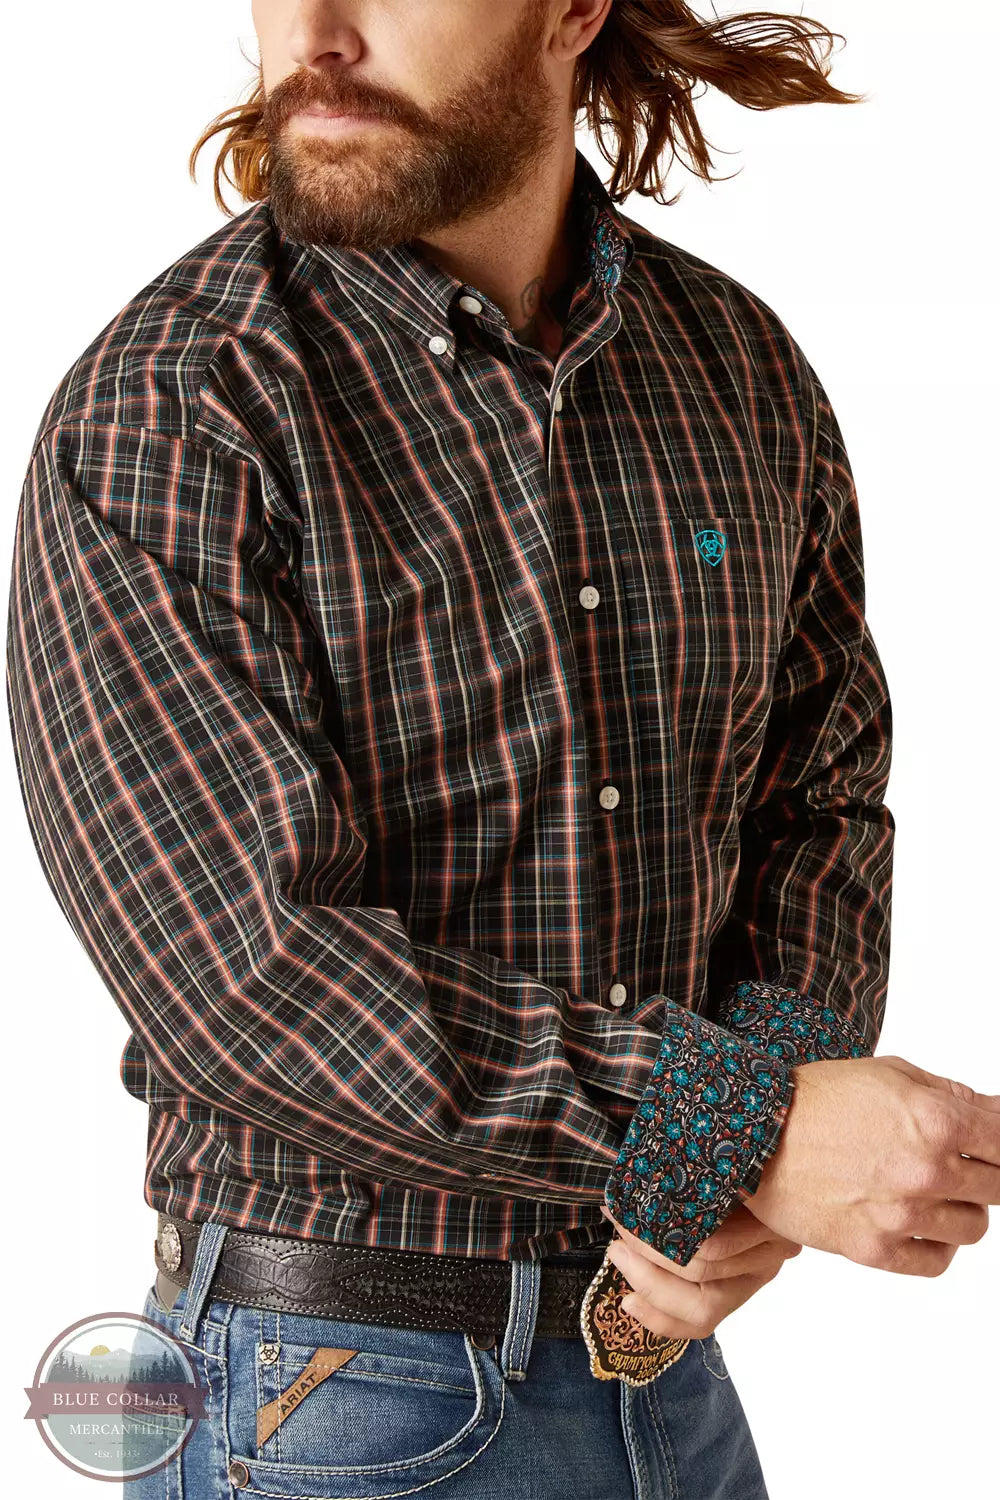 Ariat 10047344 Wrinkle Free Gaven Classic Fit Long Sleeve Shirt in Black Plaid Detail View